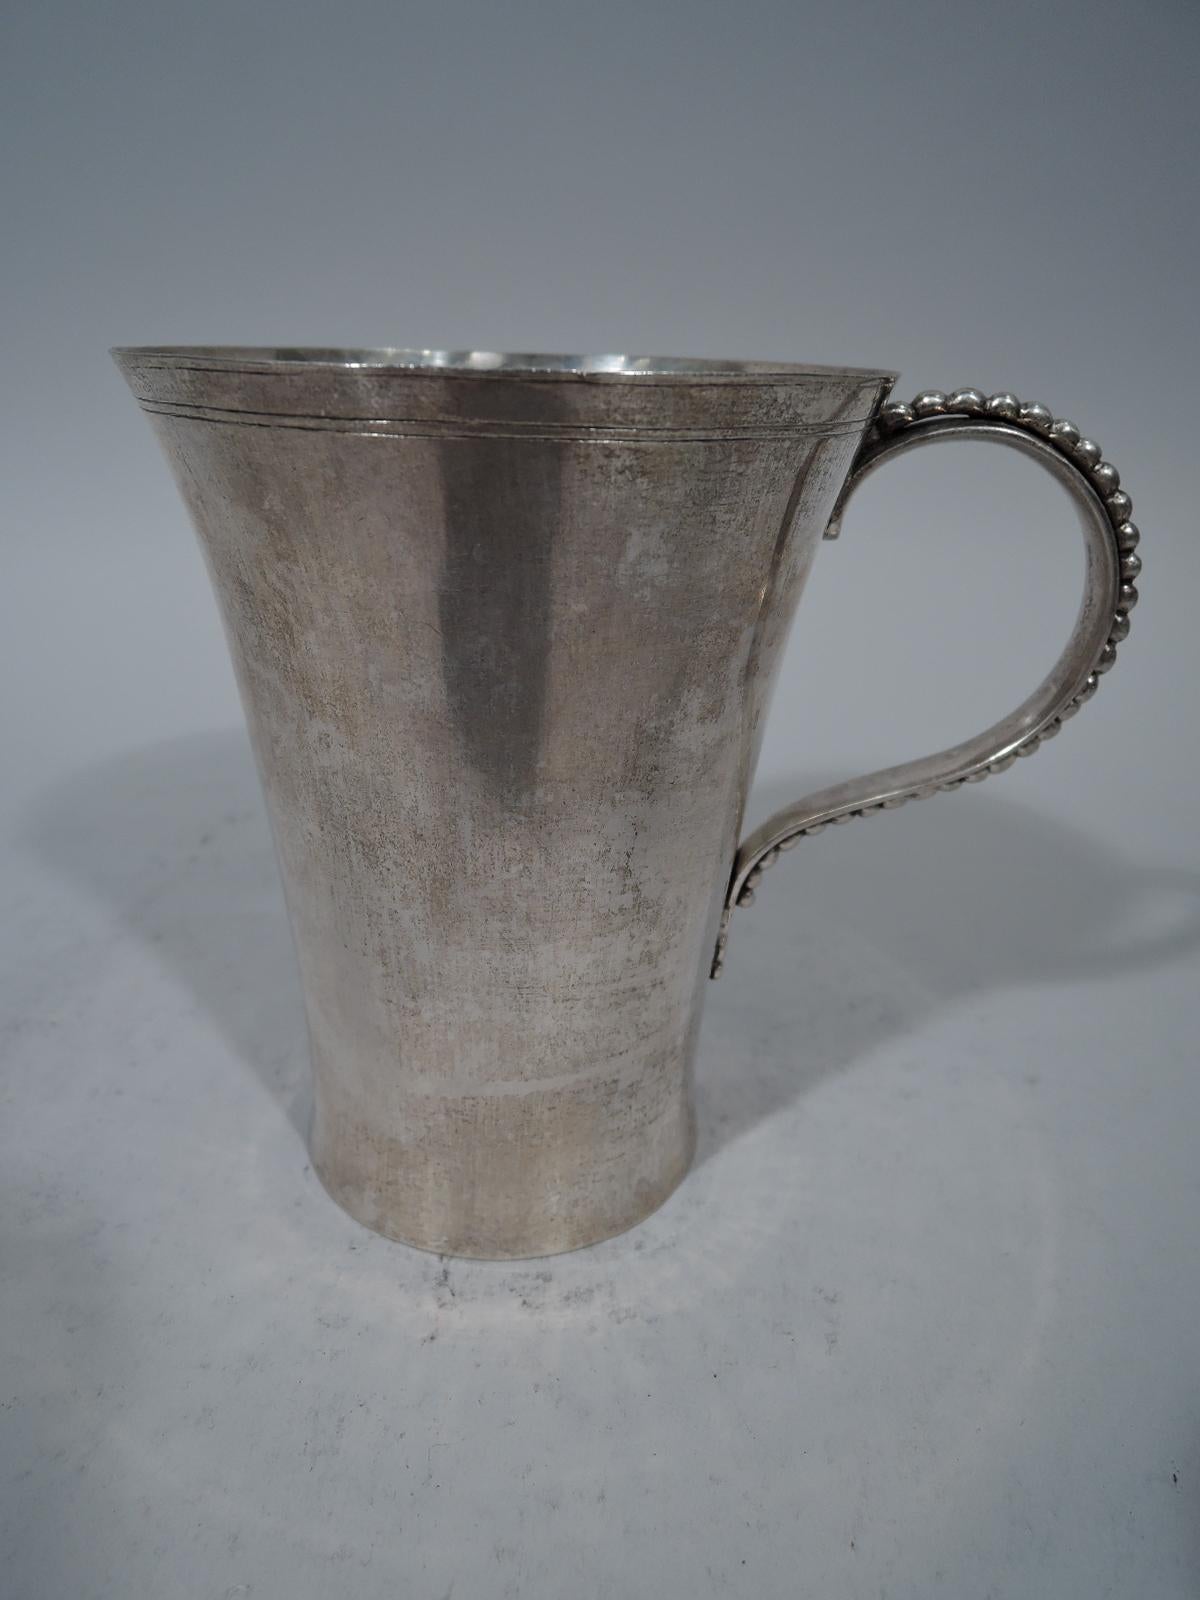 Tall and heavy South American silver mug, circa 1860. Tapering with finely engraved rim bands. Scroll handle applied with beading. Interior has visible signs of handwork. Weight: 10.5 troy ounces.